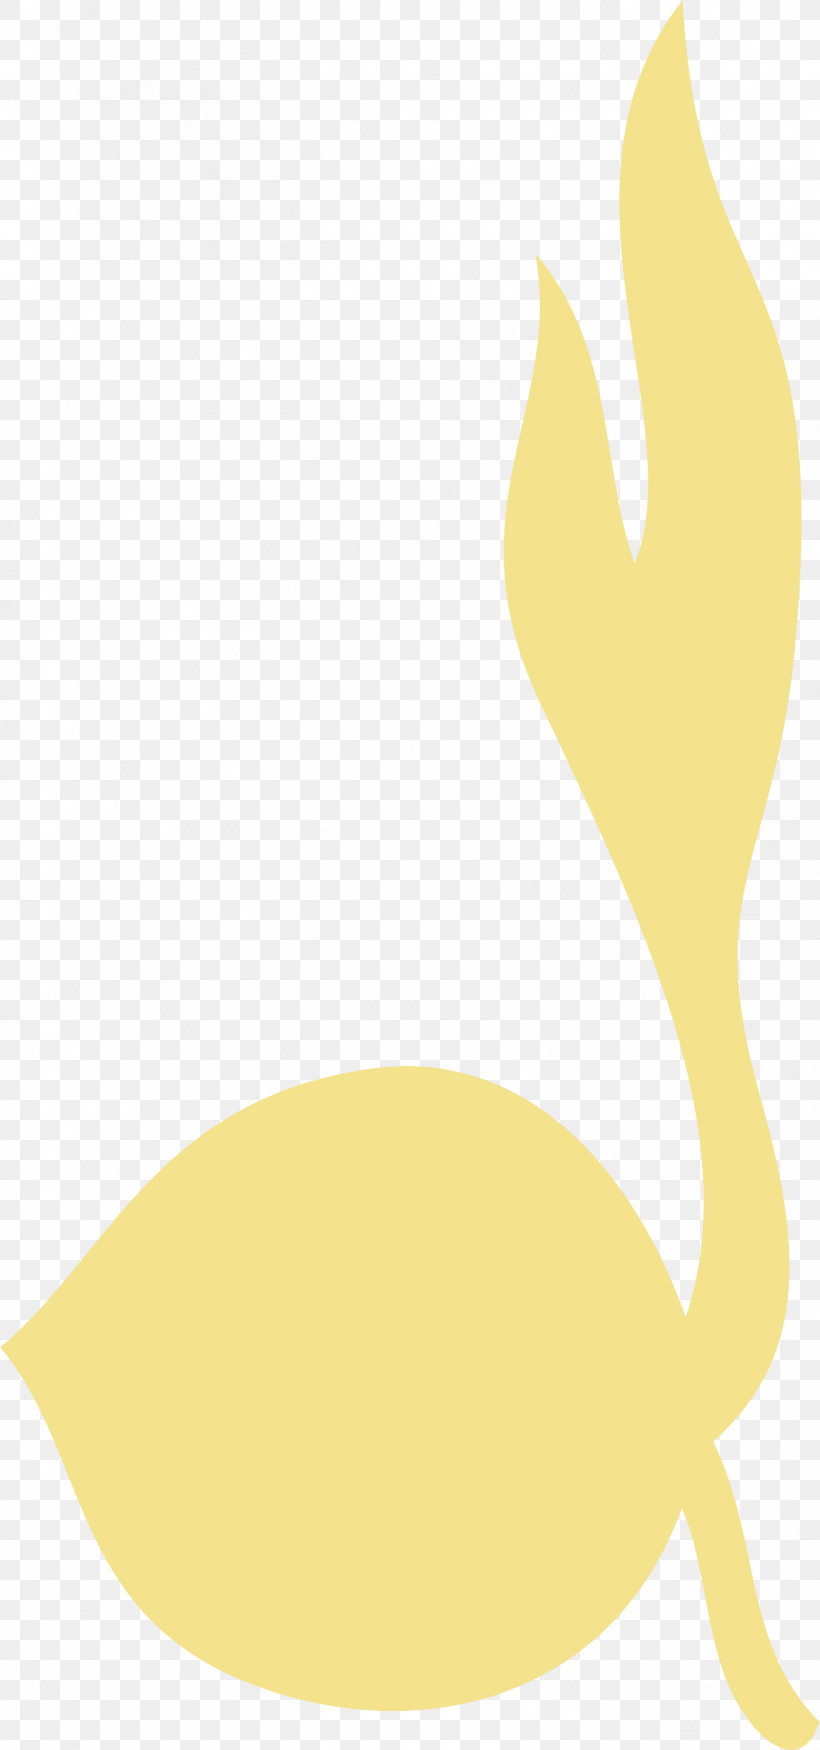 Yellow Swan, PNG, 1405x2999px, Yellow, Swan Download Free